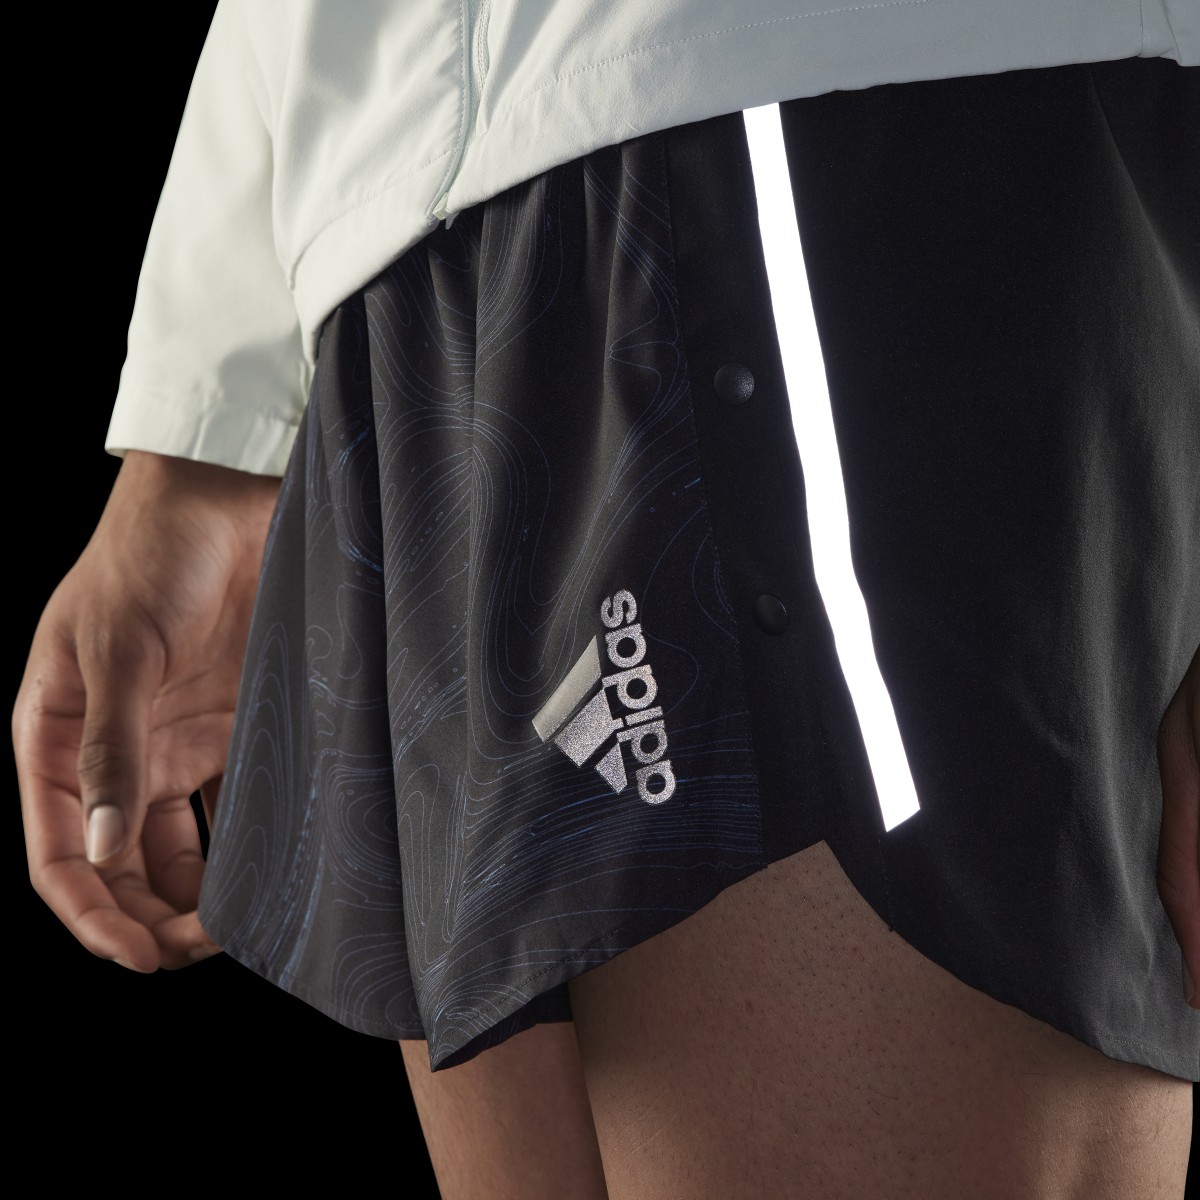 Adidas Shorts Designed for Running for the Oceans. 5